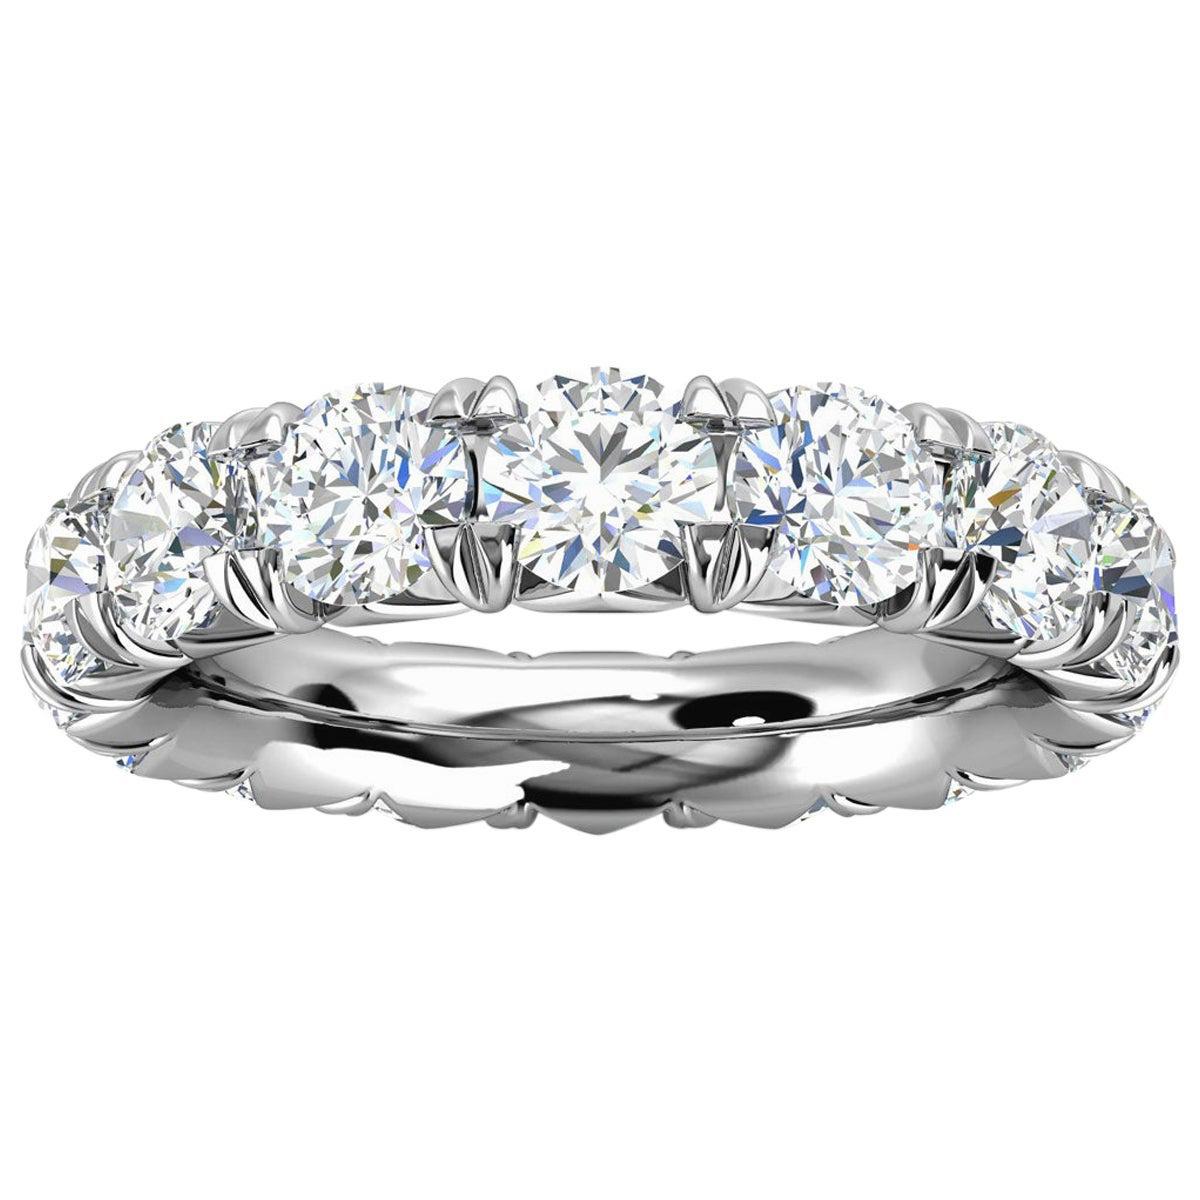 For Sale:  14k White Gold Mia French Pave Diamond Eternity Ring '4 Ct. Tw'